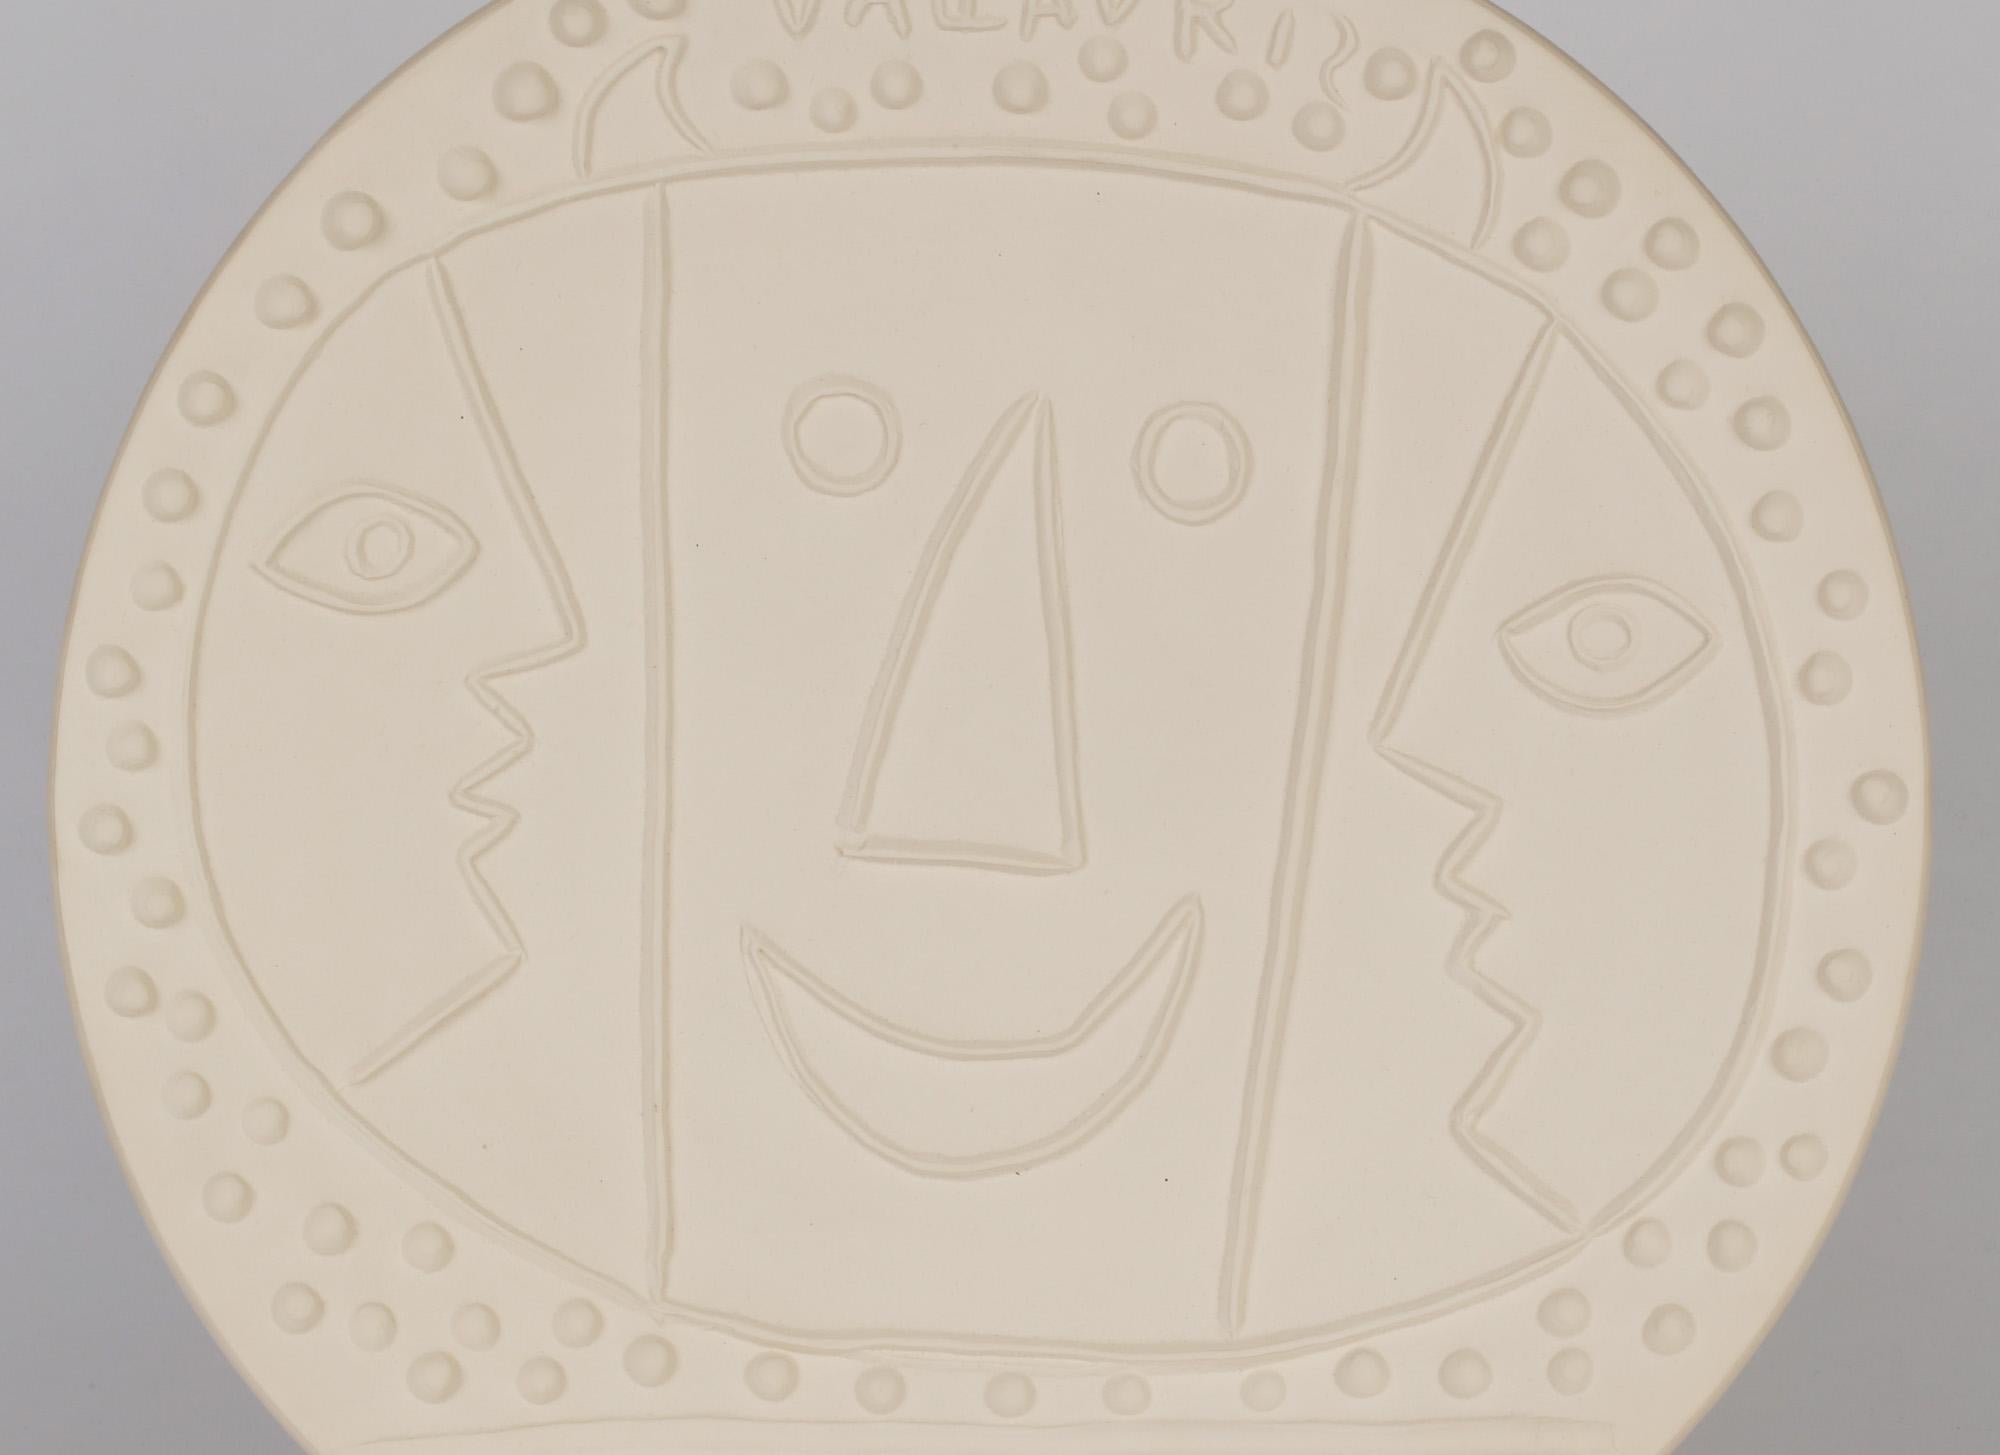 Pablo Picasso Vallauris A.R. 330 Limited Edition Plate With Three Faces, 1956 In Good Condition For Sale In Bishop's Stortford, Hertfordshire